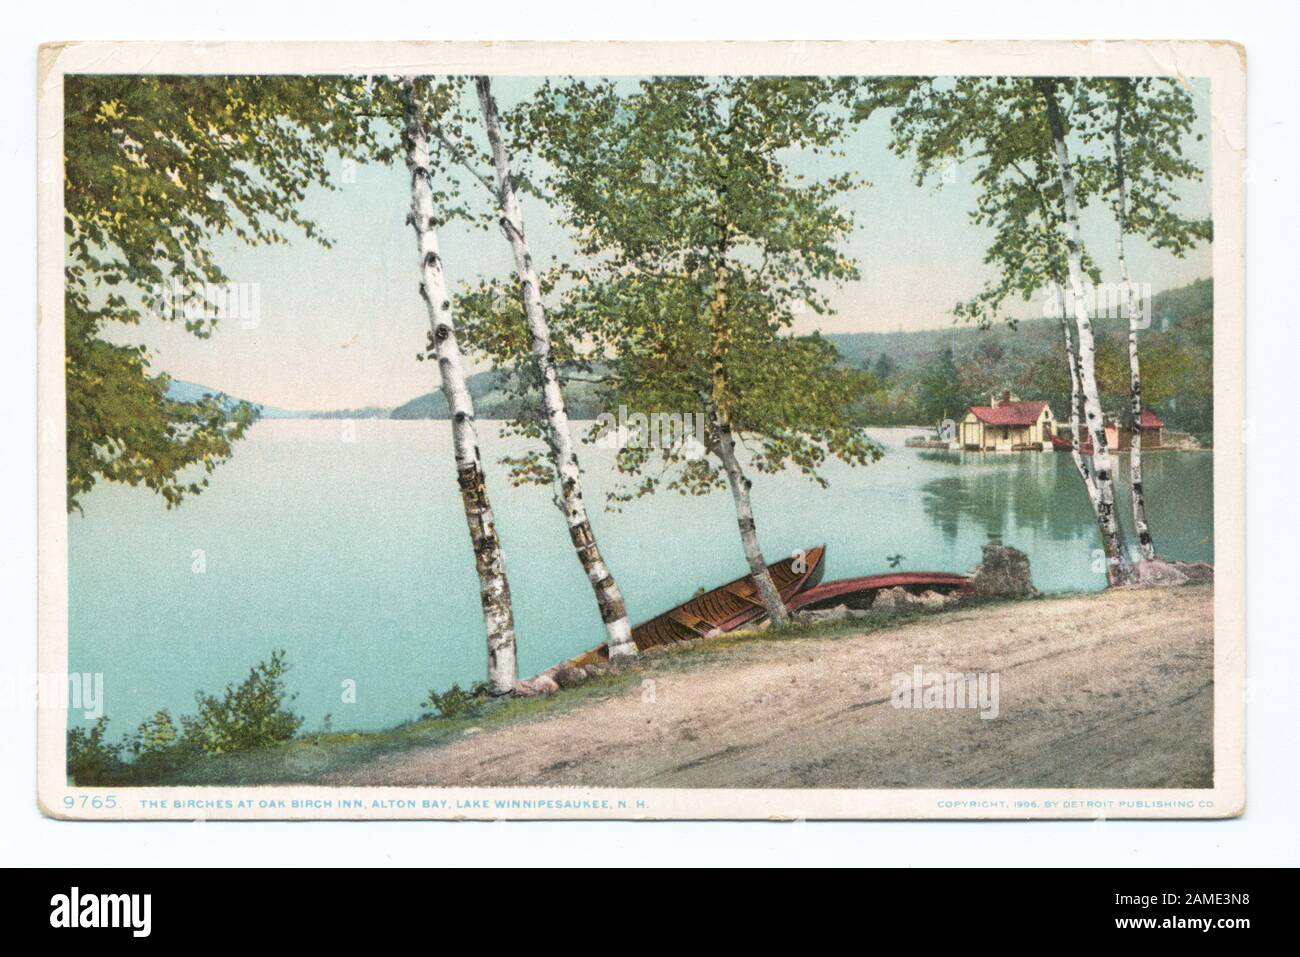 The Birches at Oak Birch Inn, Alton Bay, Lake Winnipesaukee, N H  Postcard series number: 9765 Became Detroit Publishing Company. New imprint with artist's pallet trademark. Included images with dates prior to 1906.; The Birches at Oak Birch Inn, Alton Bay, Lake Winnipesaukee, N. H. Stock Photo